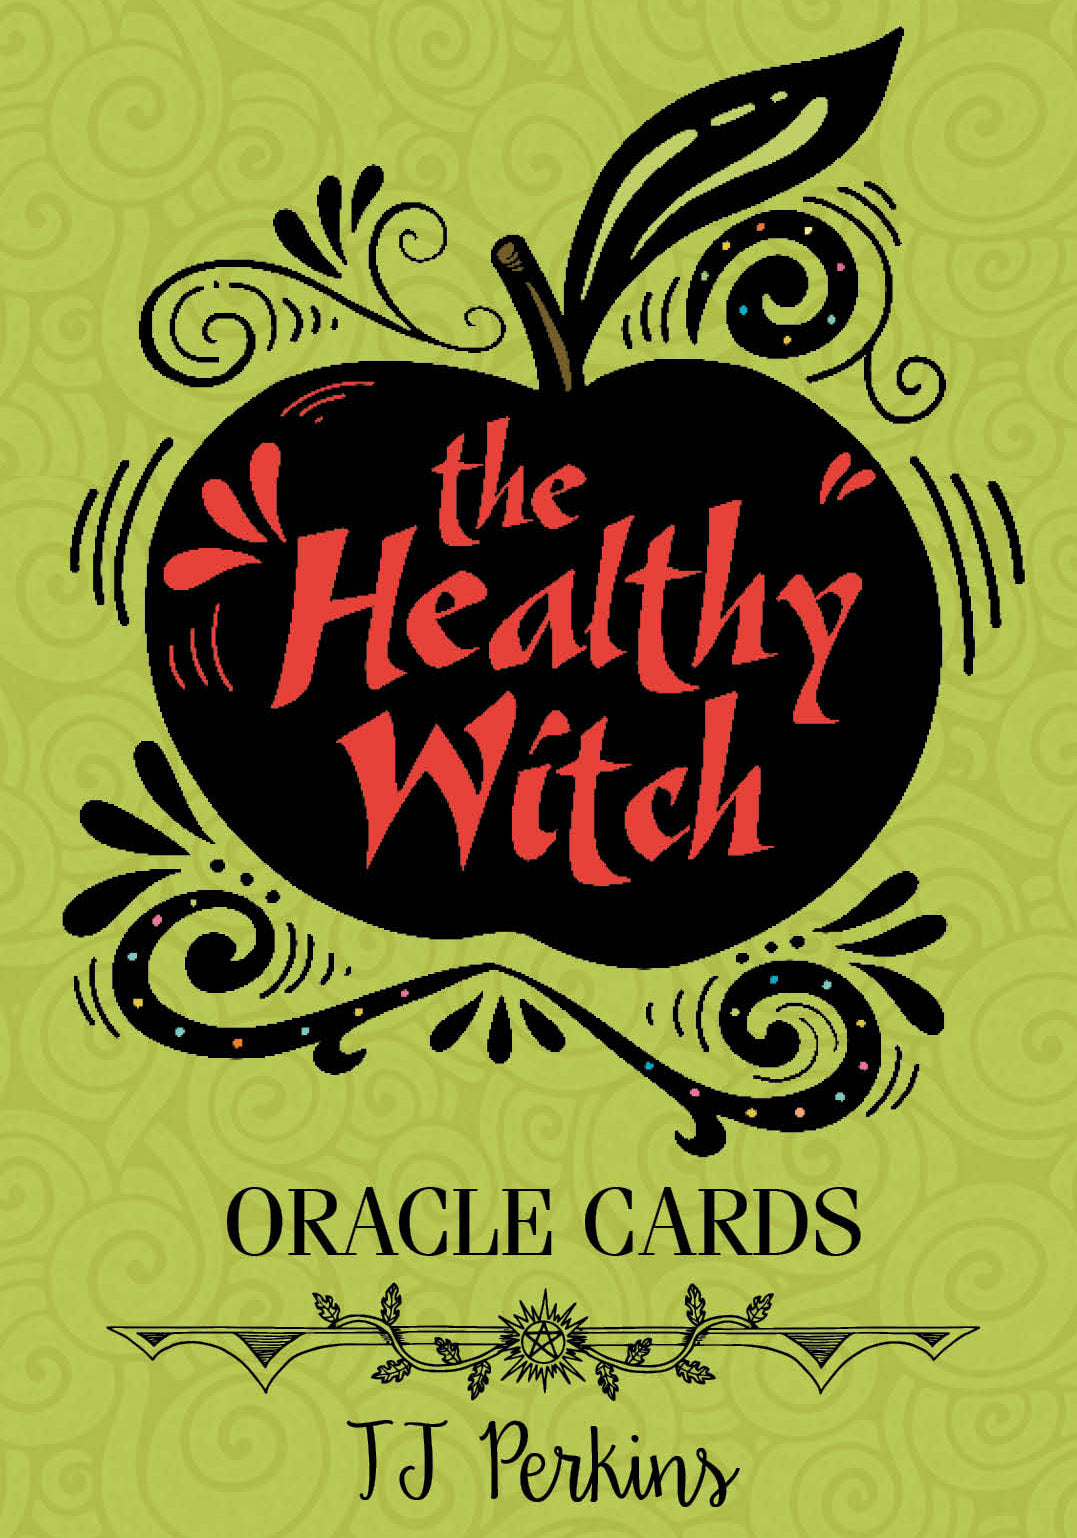 Using the Healthy Witch Oracle Cards